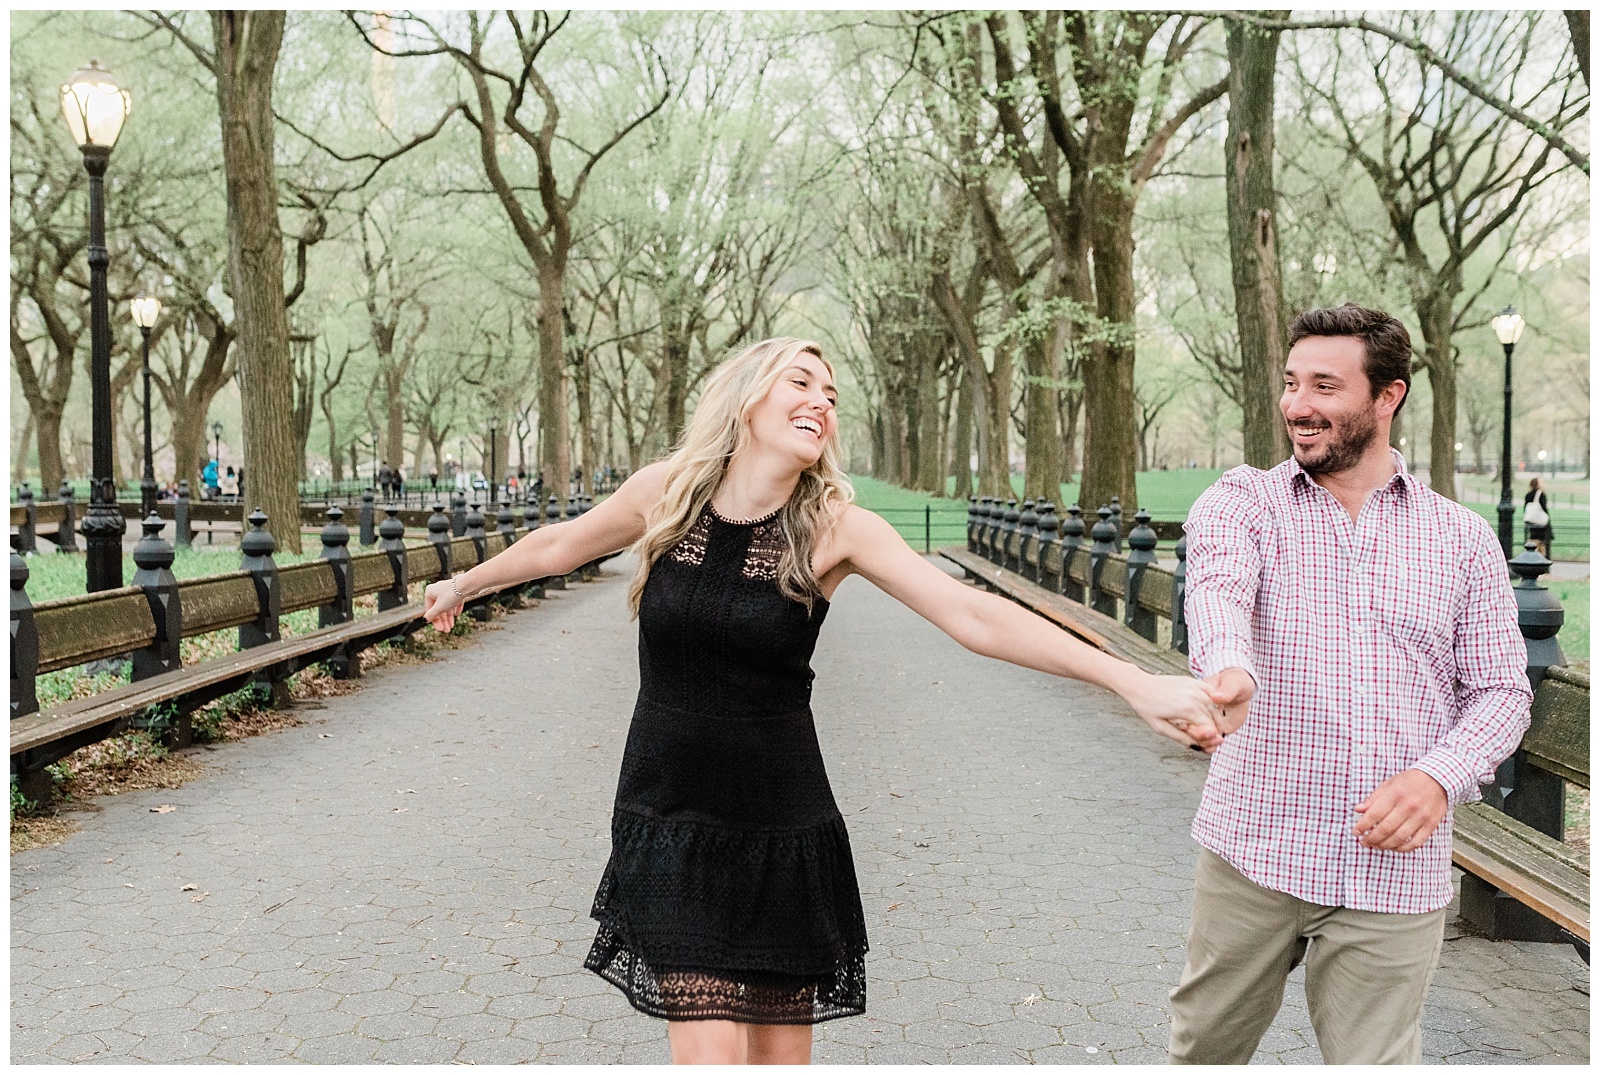 A man and woman laugh together holding hands in the Mall at Central Park, NYC.